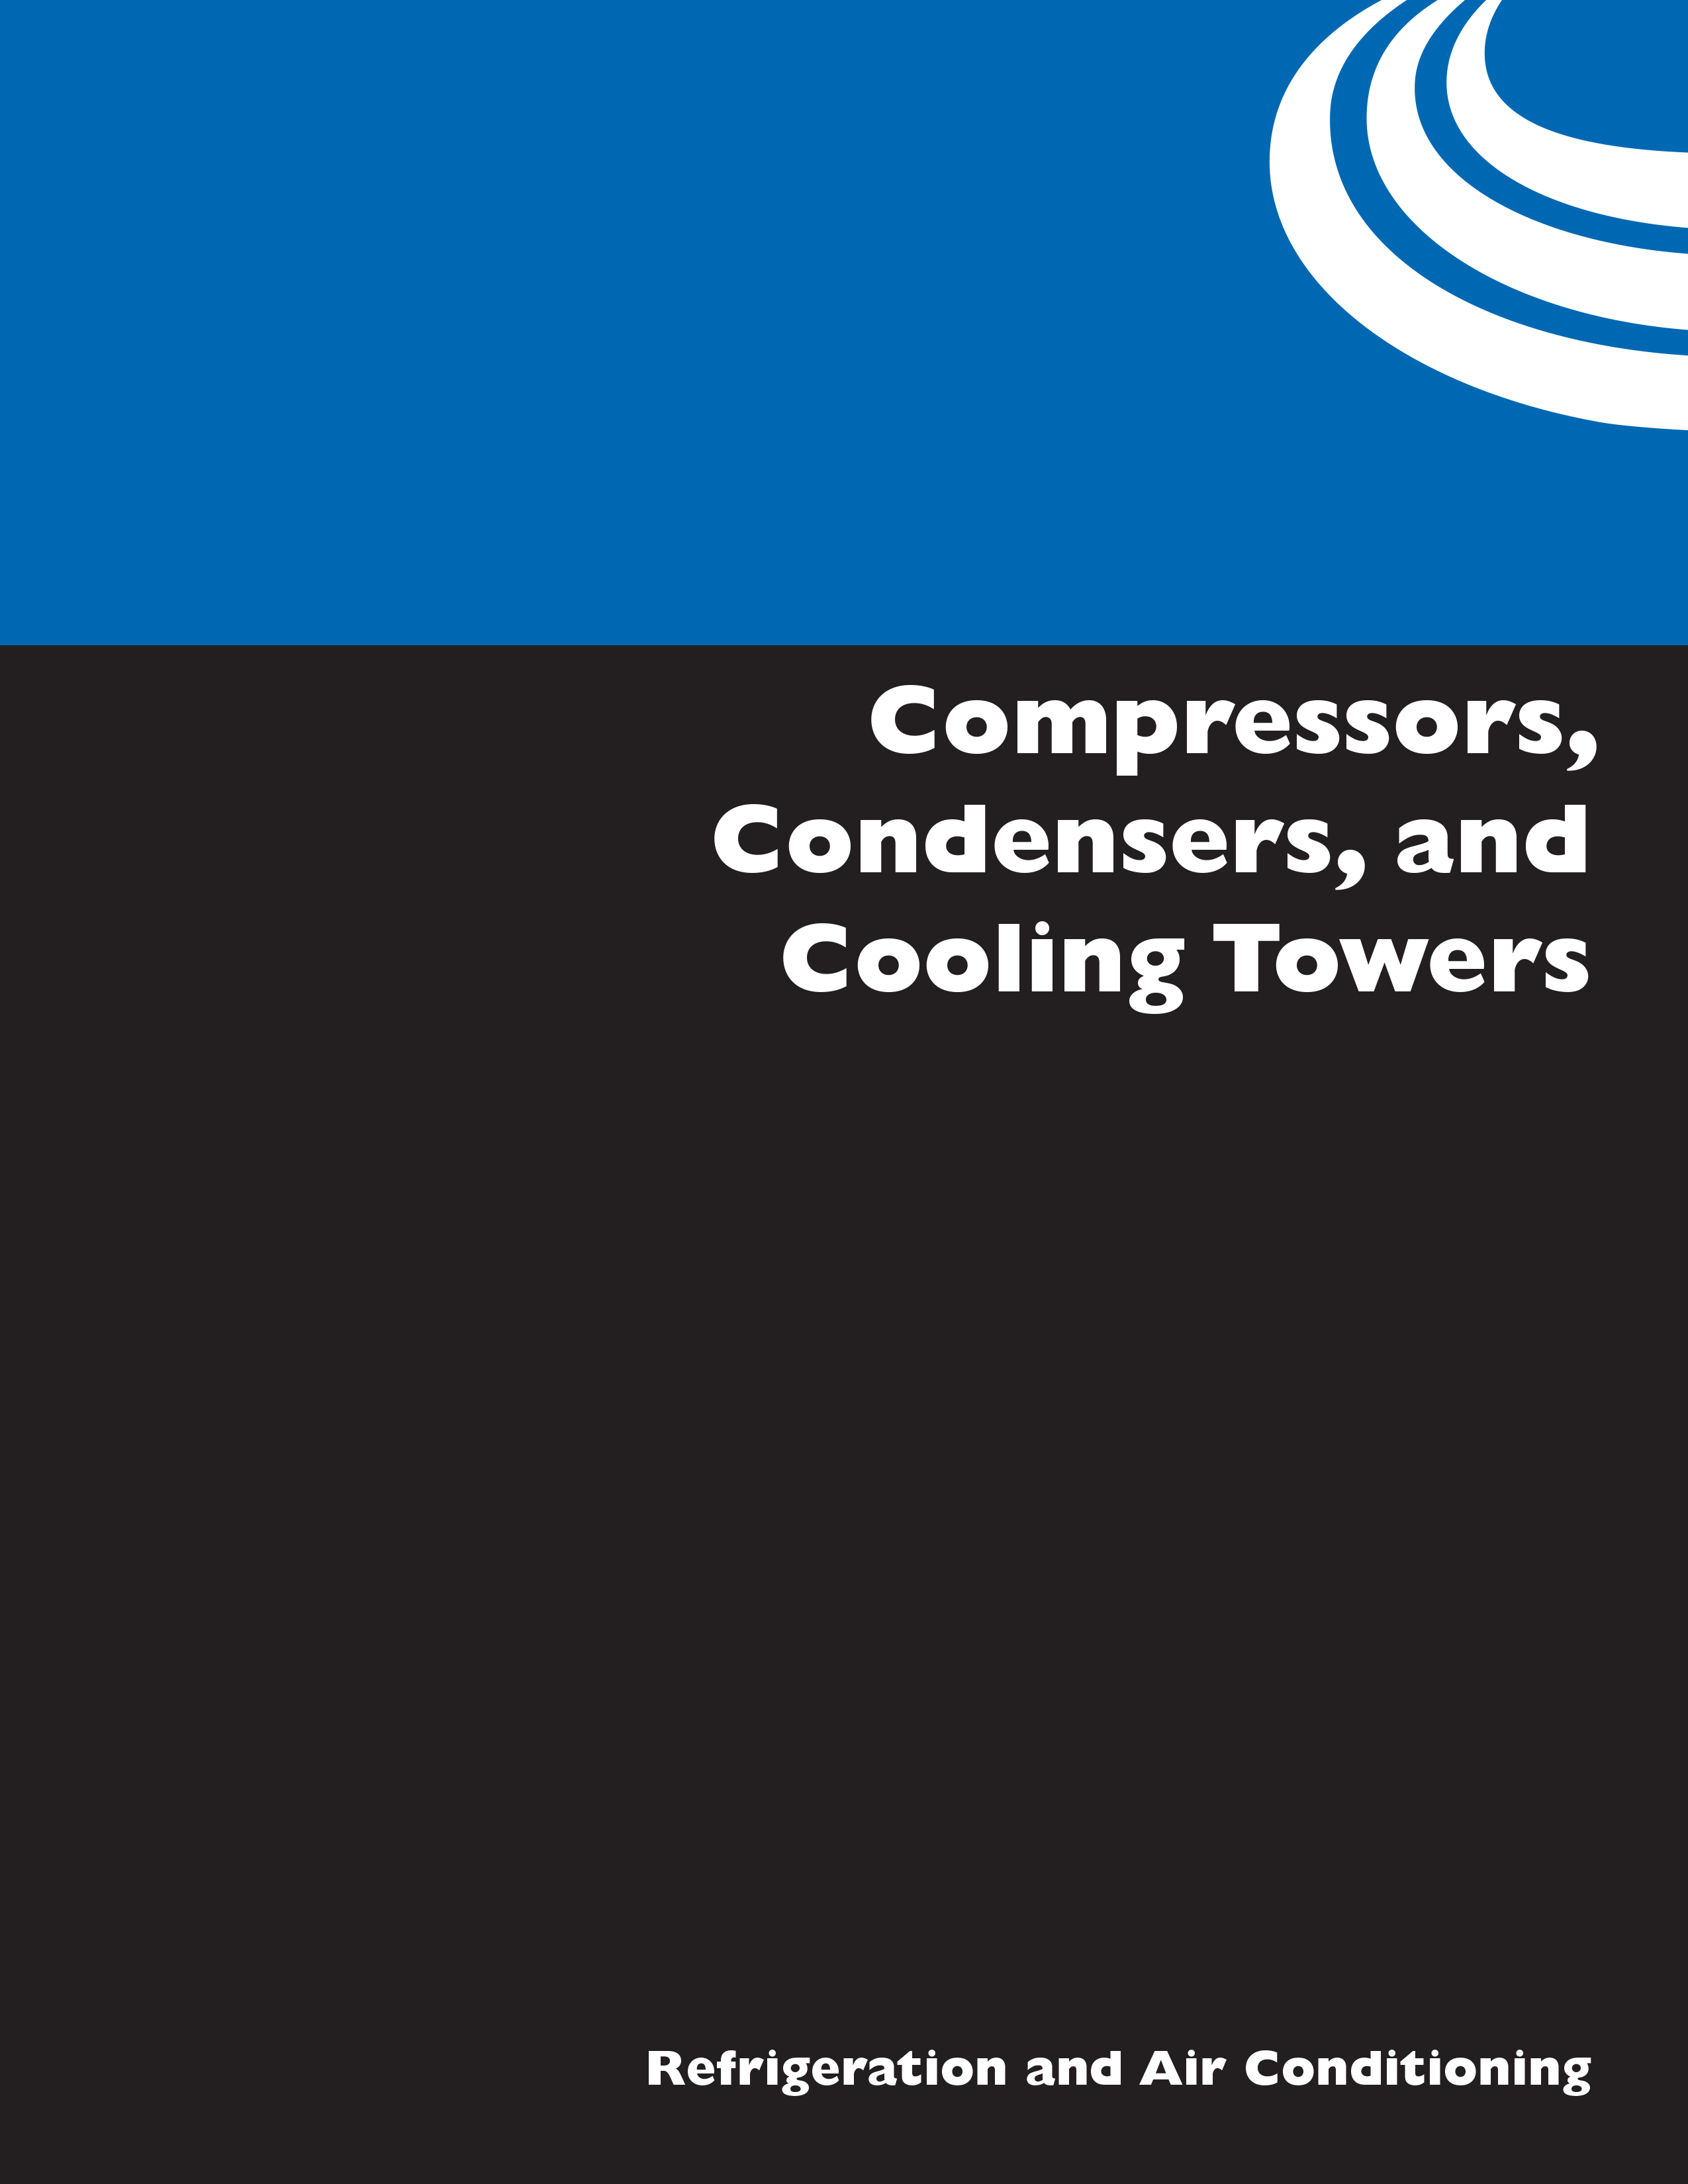 Compressors, Condensers, and Cooling Towers